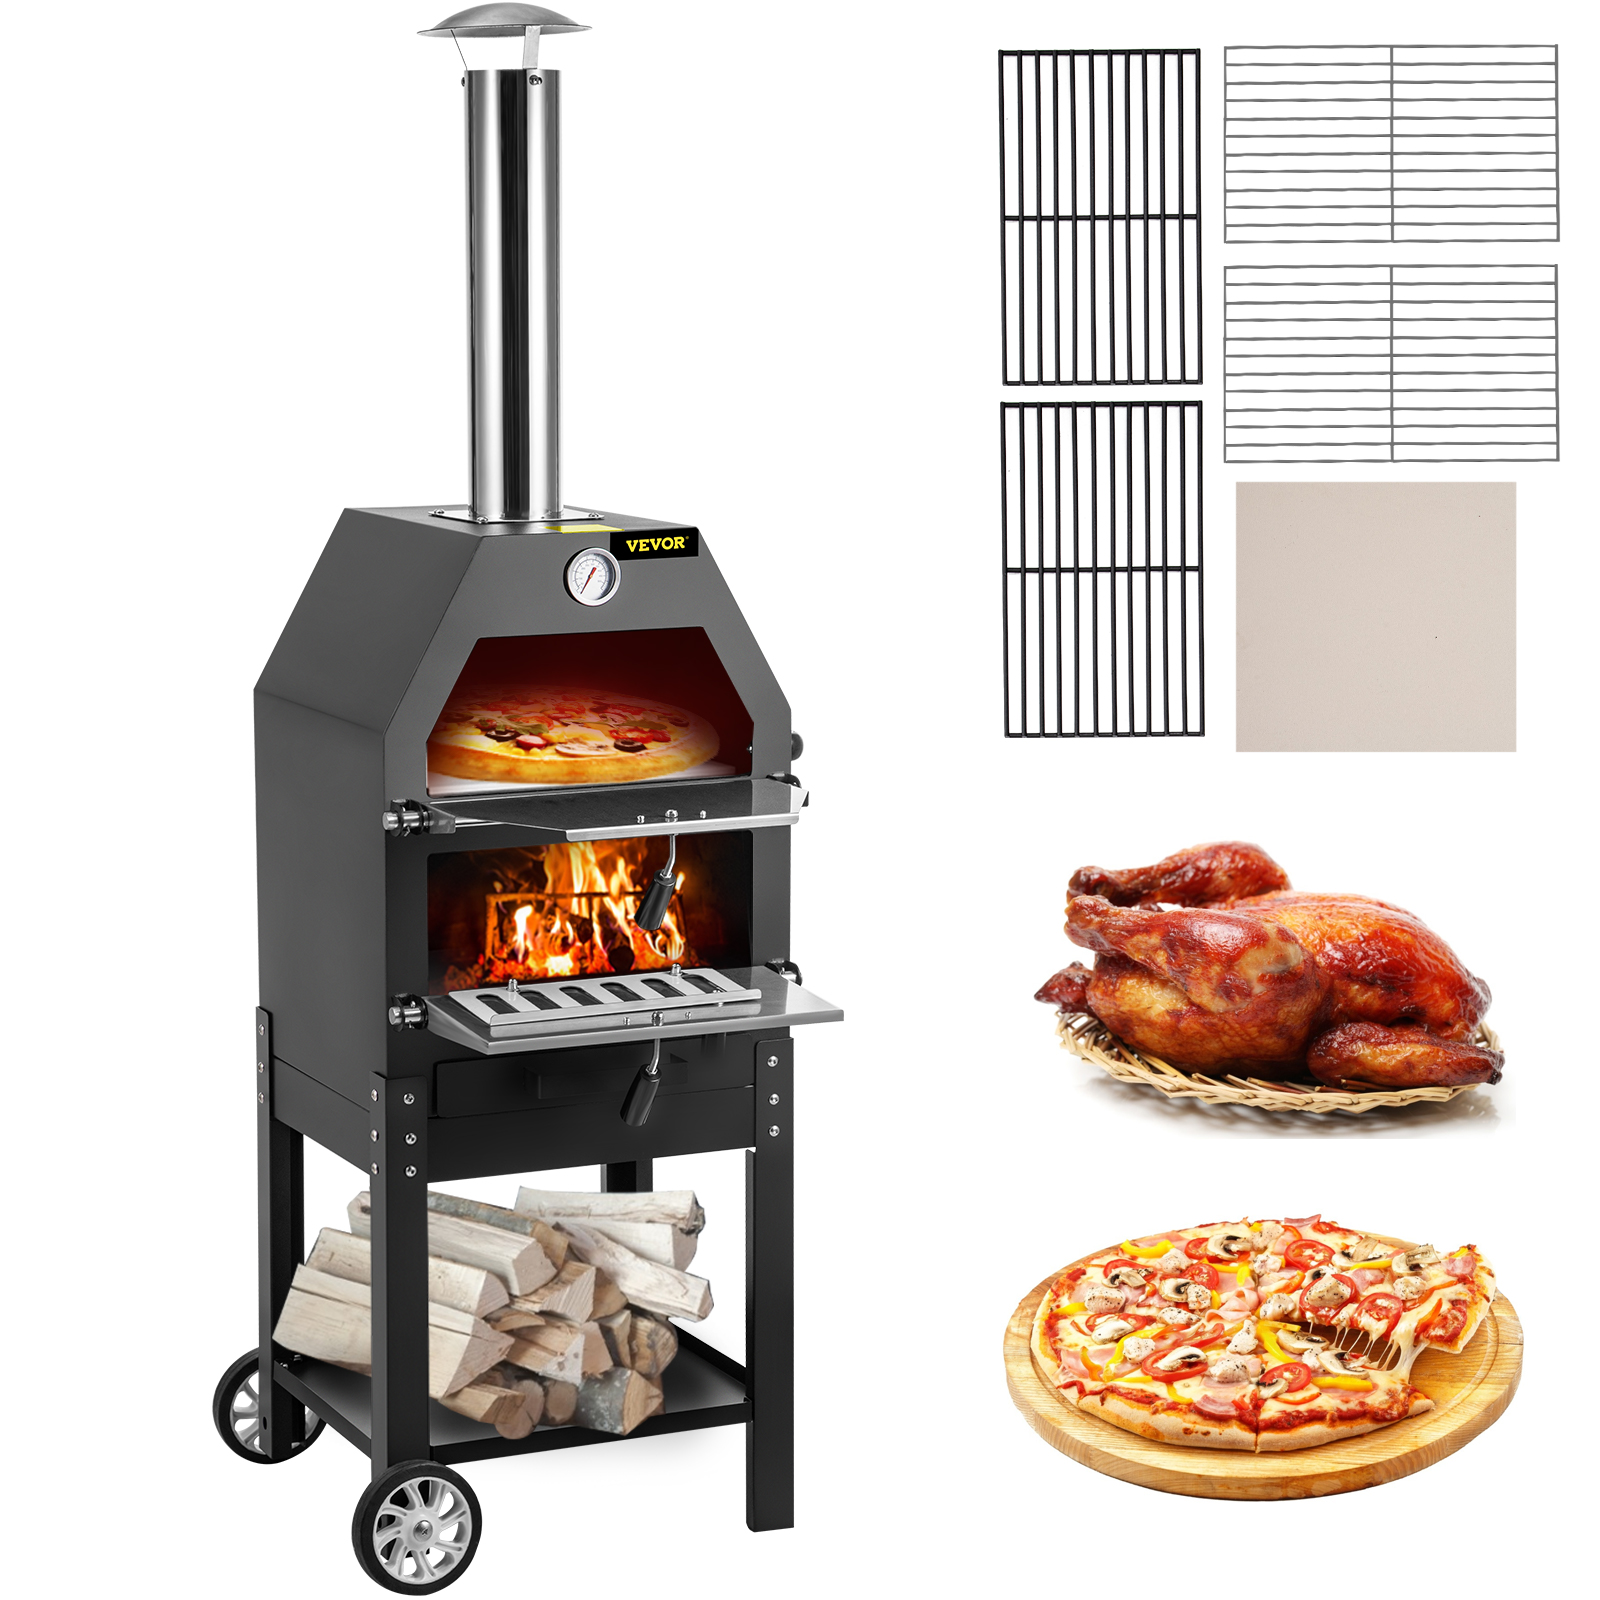 VEVOR Outdoor Pizza Oven, 12" Wood Fire Oven, 2-Layer Pizza Oven Wood Fired, Wood Burning Outdoor Pizza Oven with 2 Removable Wheels, Wood Fired Pizza Maker Ovens - image 1 of 9